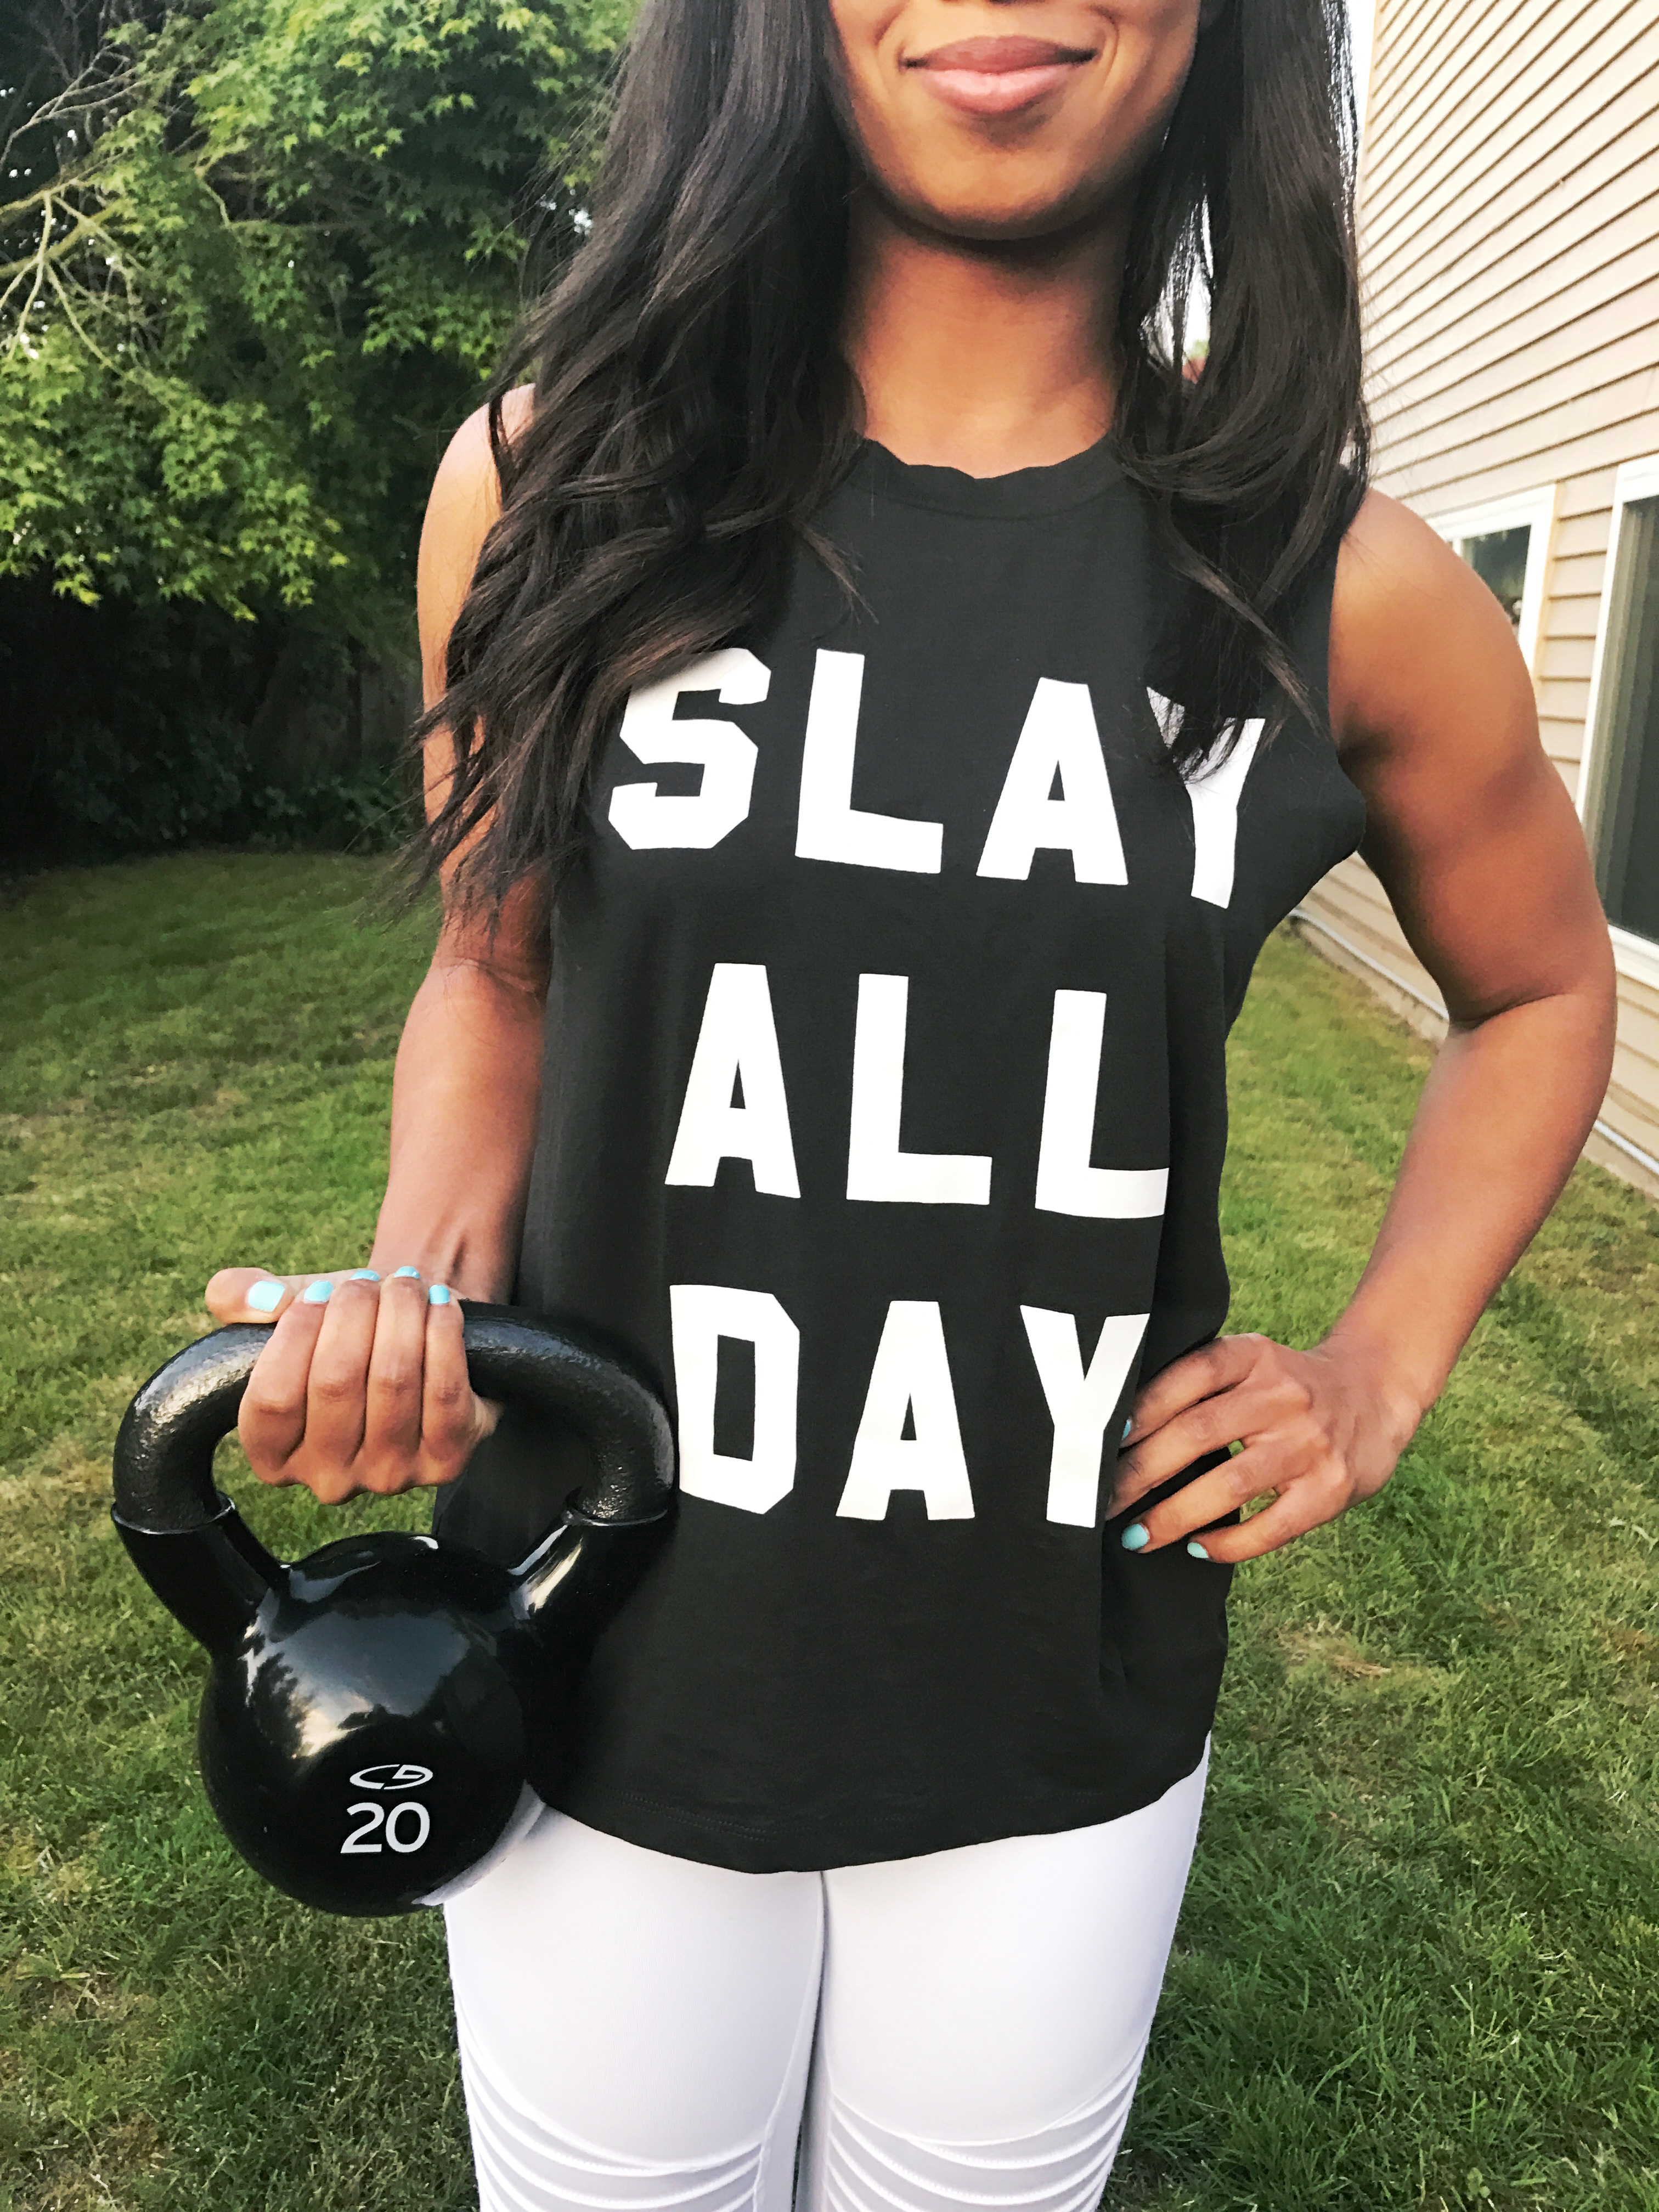 A FREE summer fitness challenge to help you feel strong, confident, and ready to SLAY.